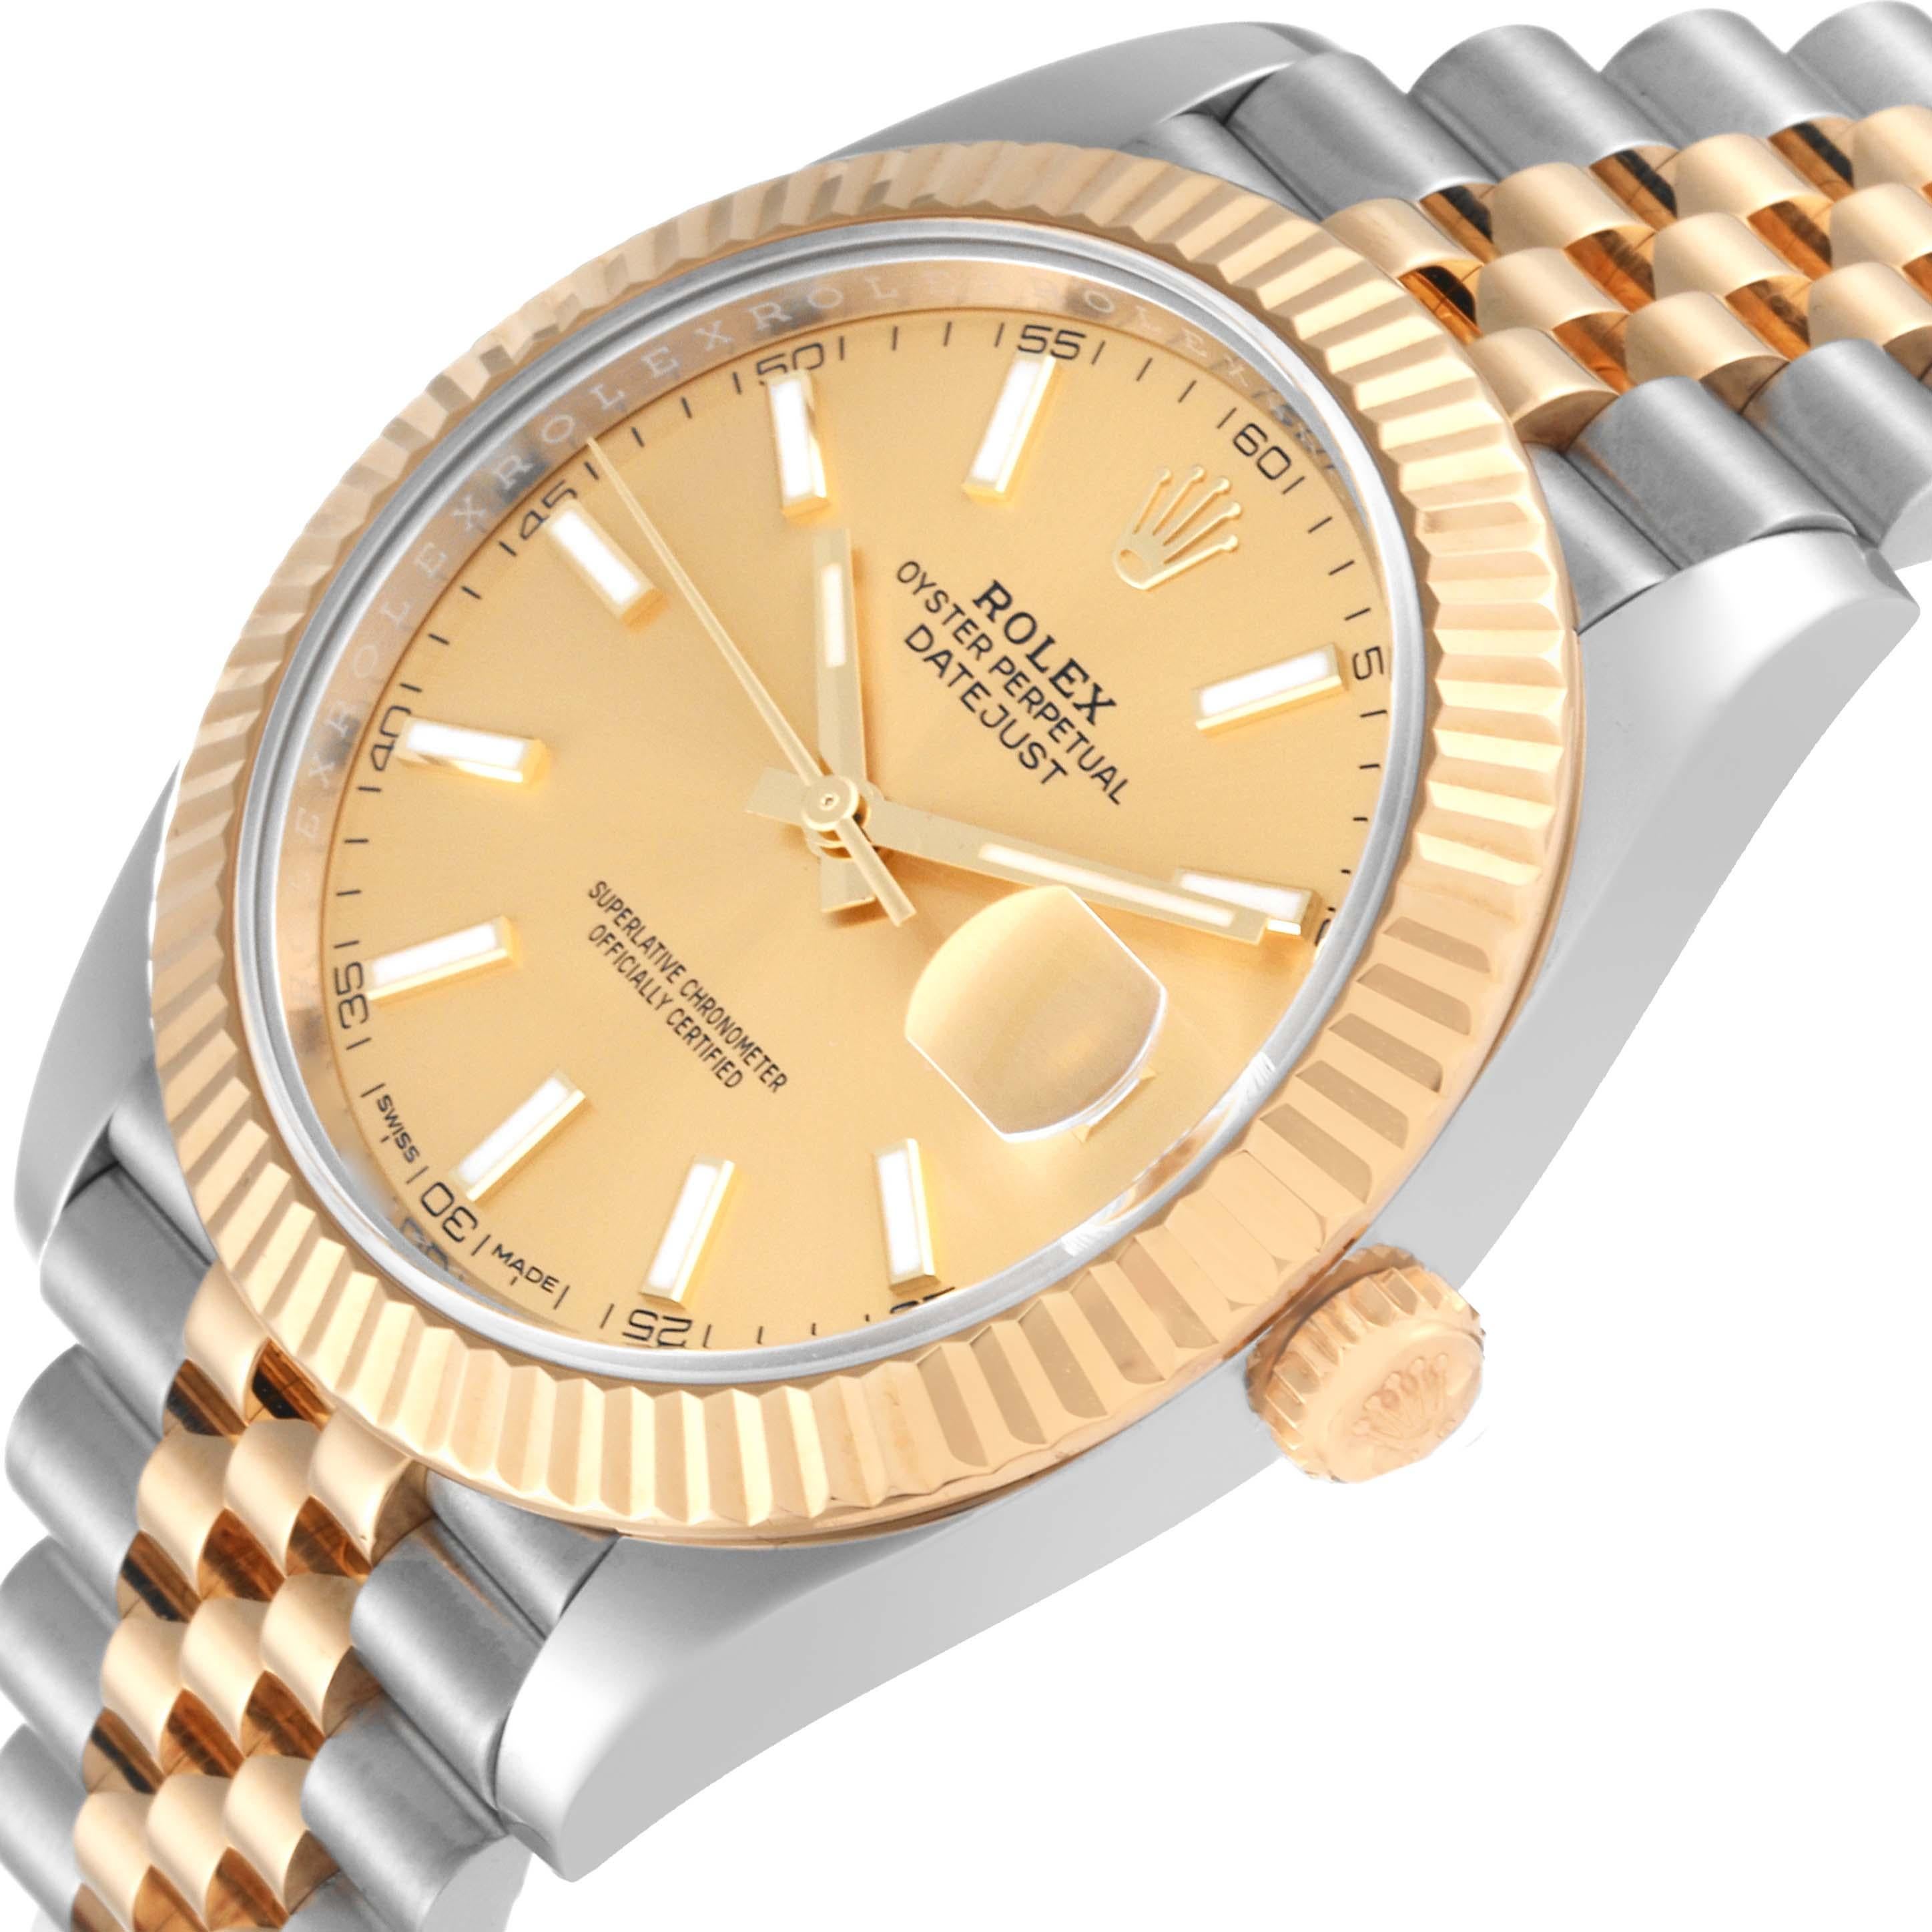 Rolex Datejust 41 Steel Yellow Gold Champagne Dial Mens Watch 126333 2